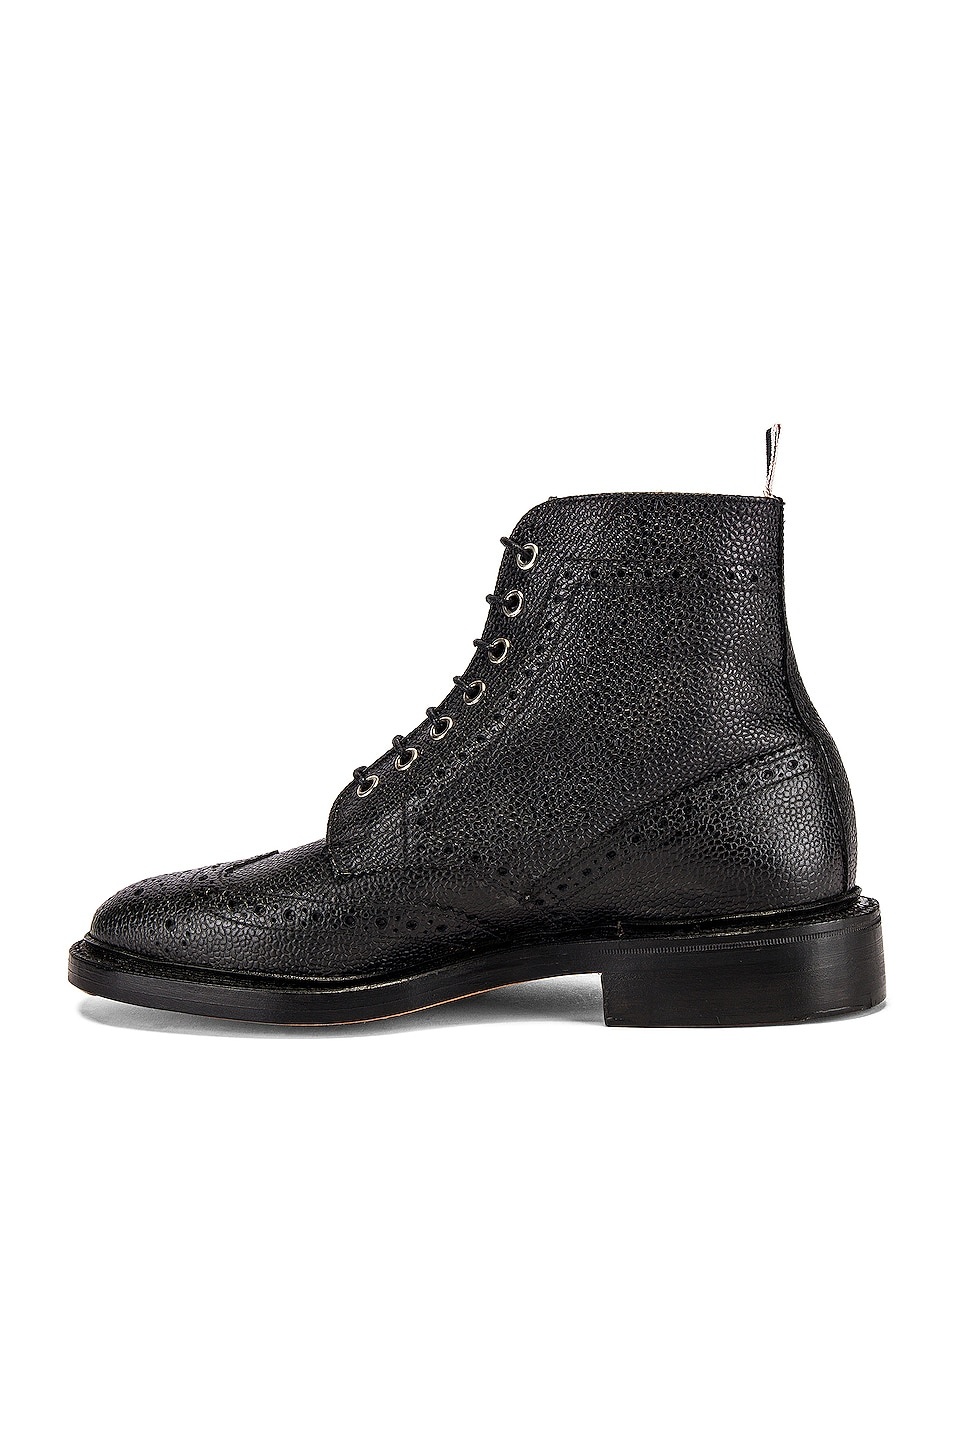 Wingtip Leather Boots - 5